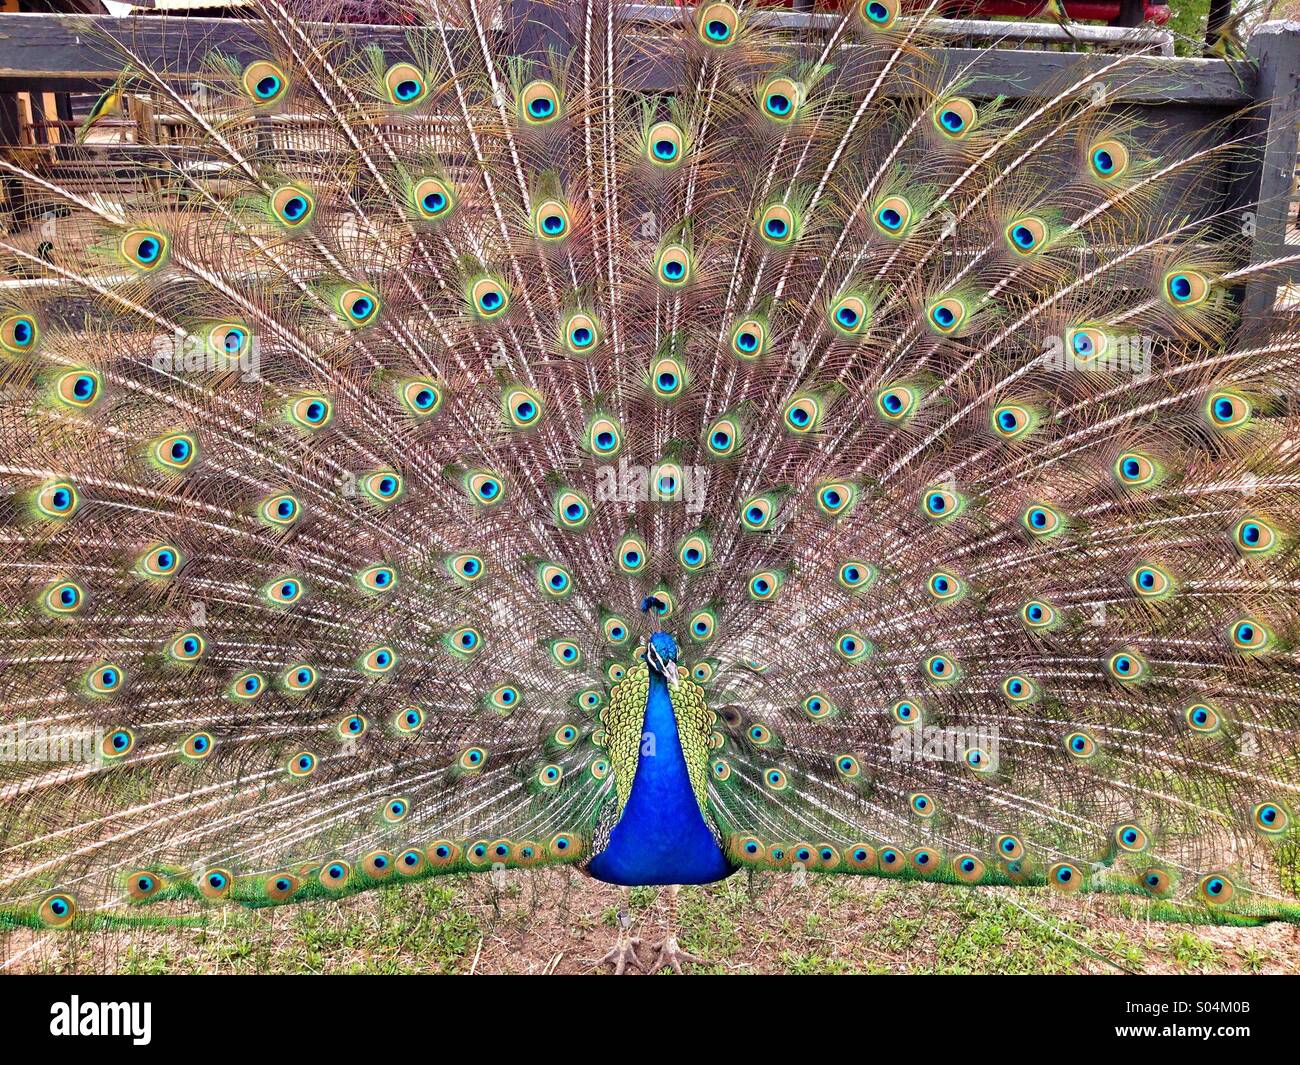 A peacock displays its tail feathers Stock Photo